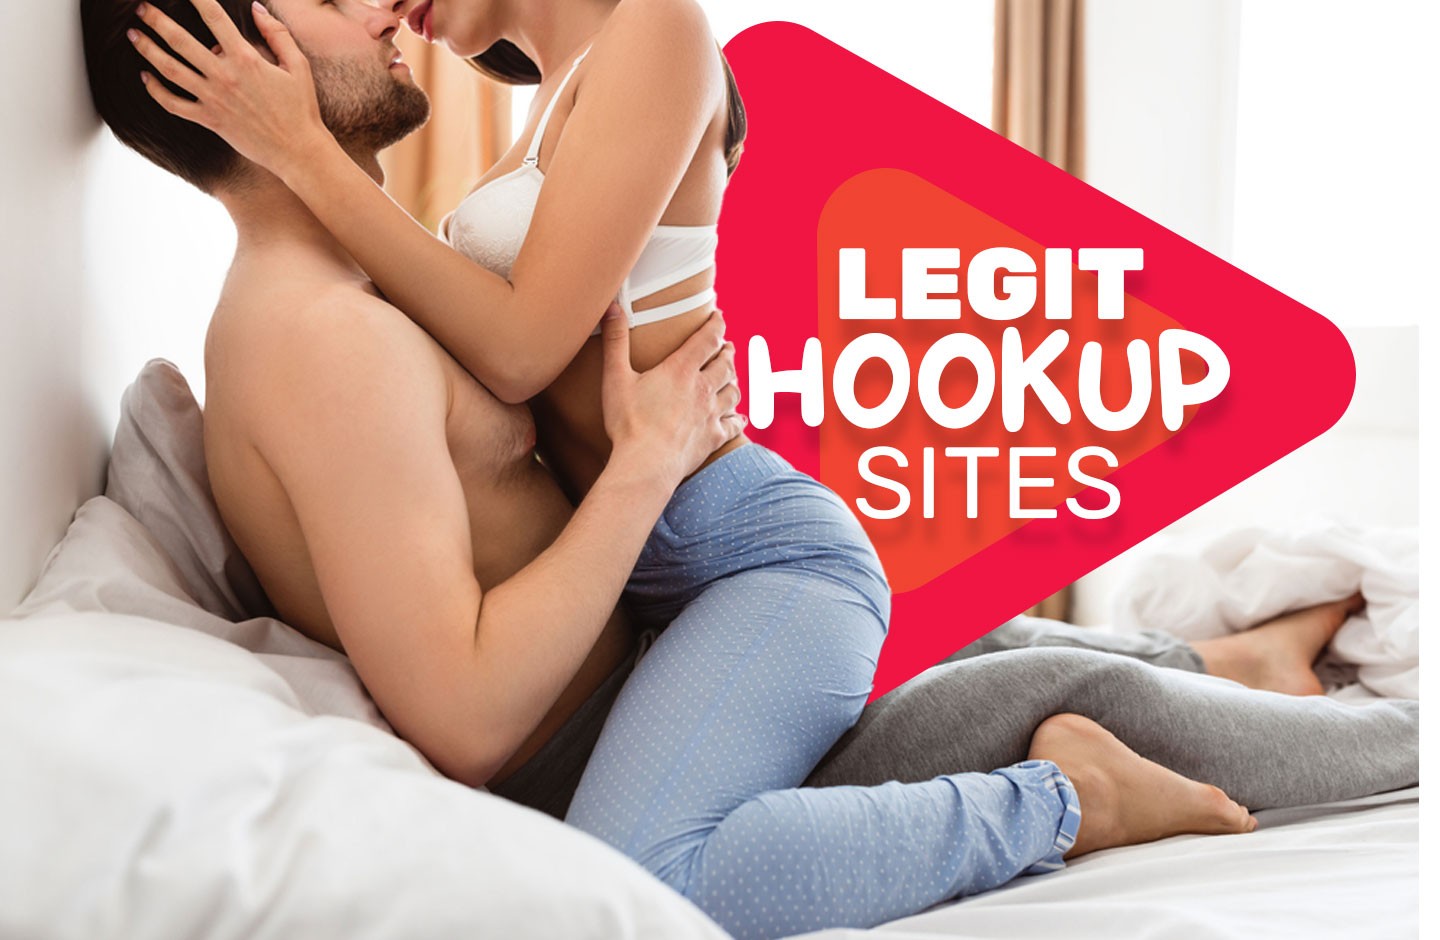 Get started with legit hookup dating sites and discover your perfect match today